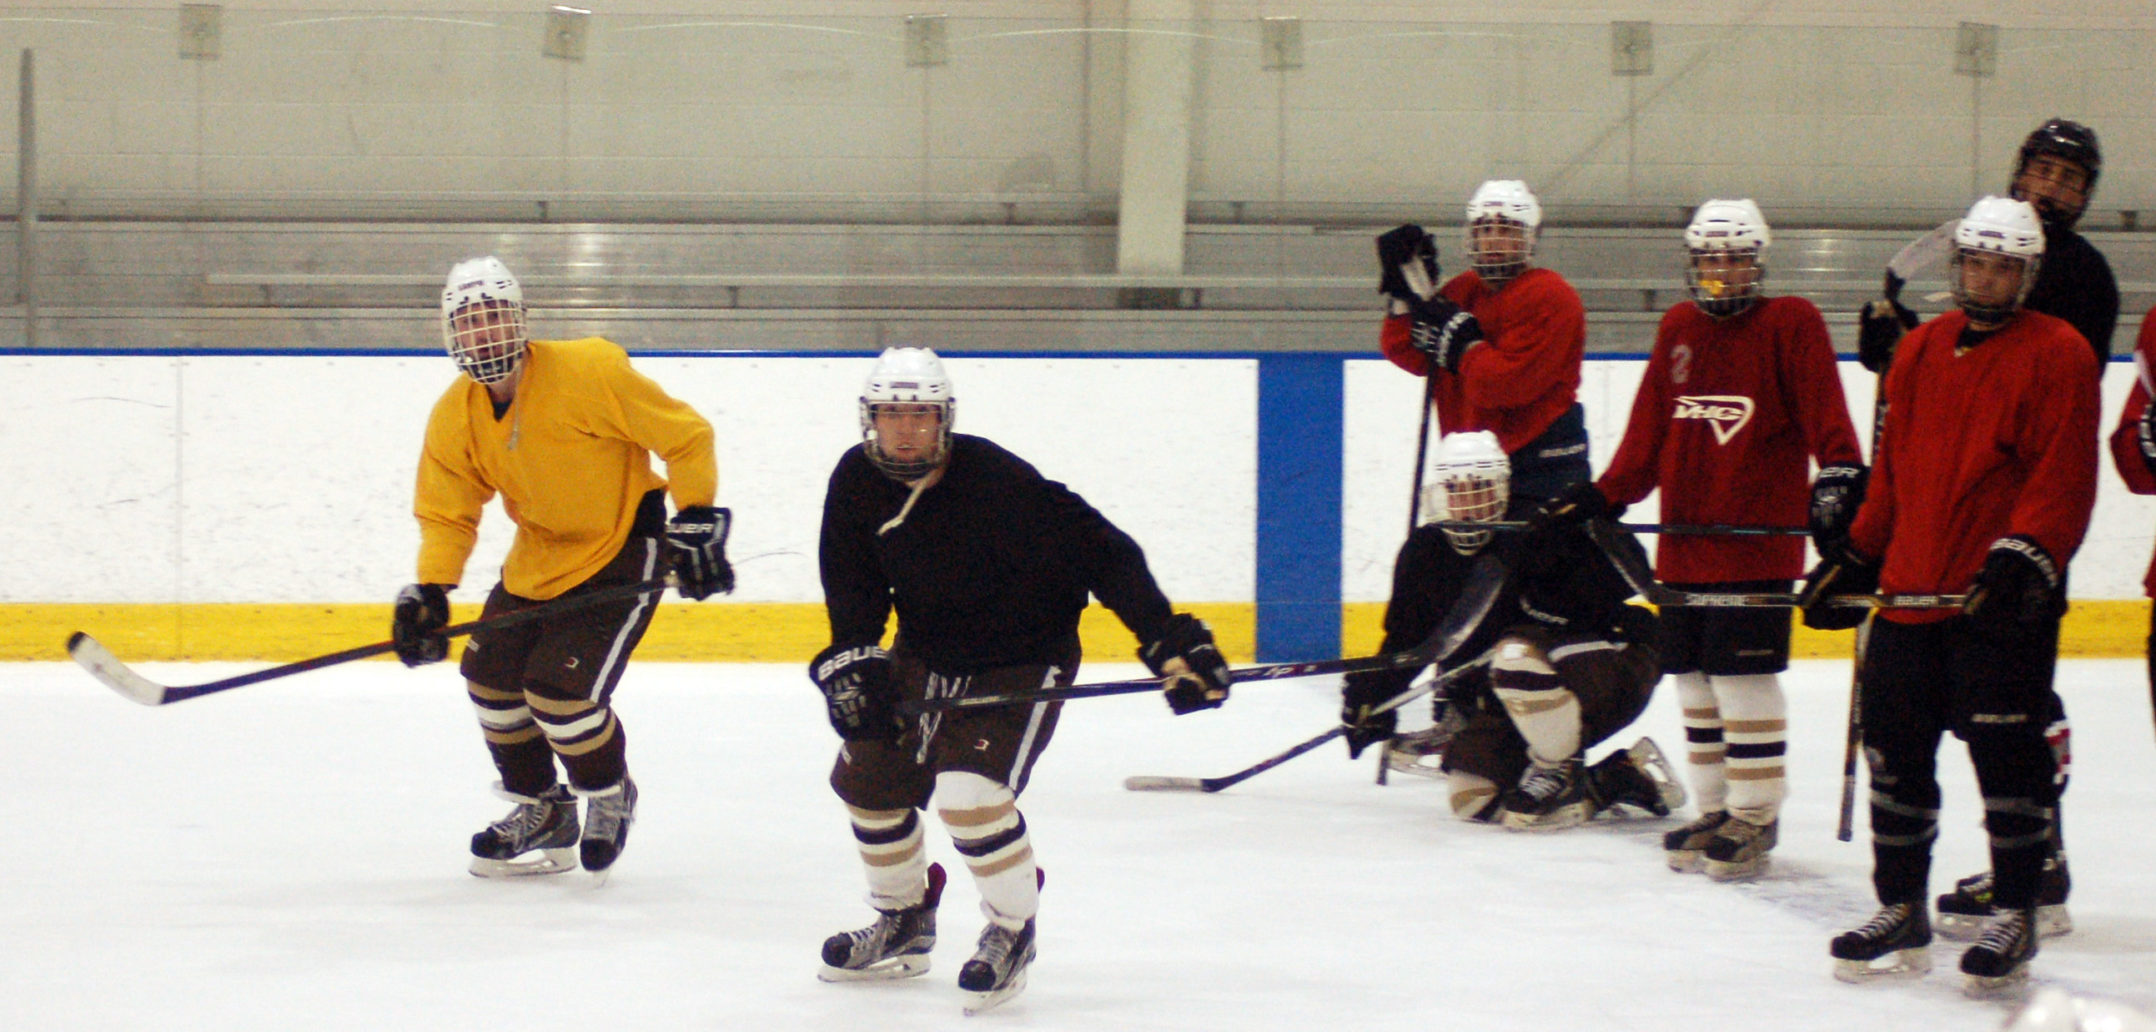 Lehigh ice hockey continues to expand and evolve - The Brown and White